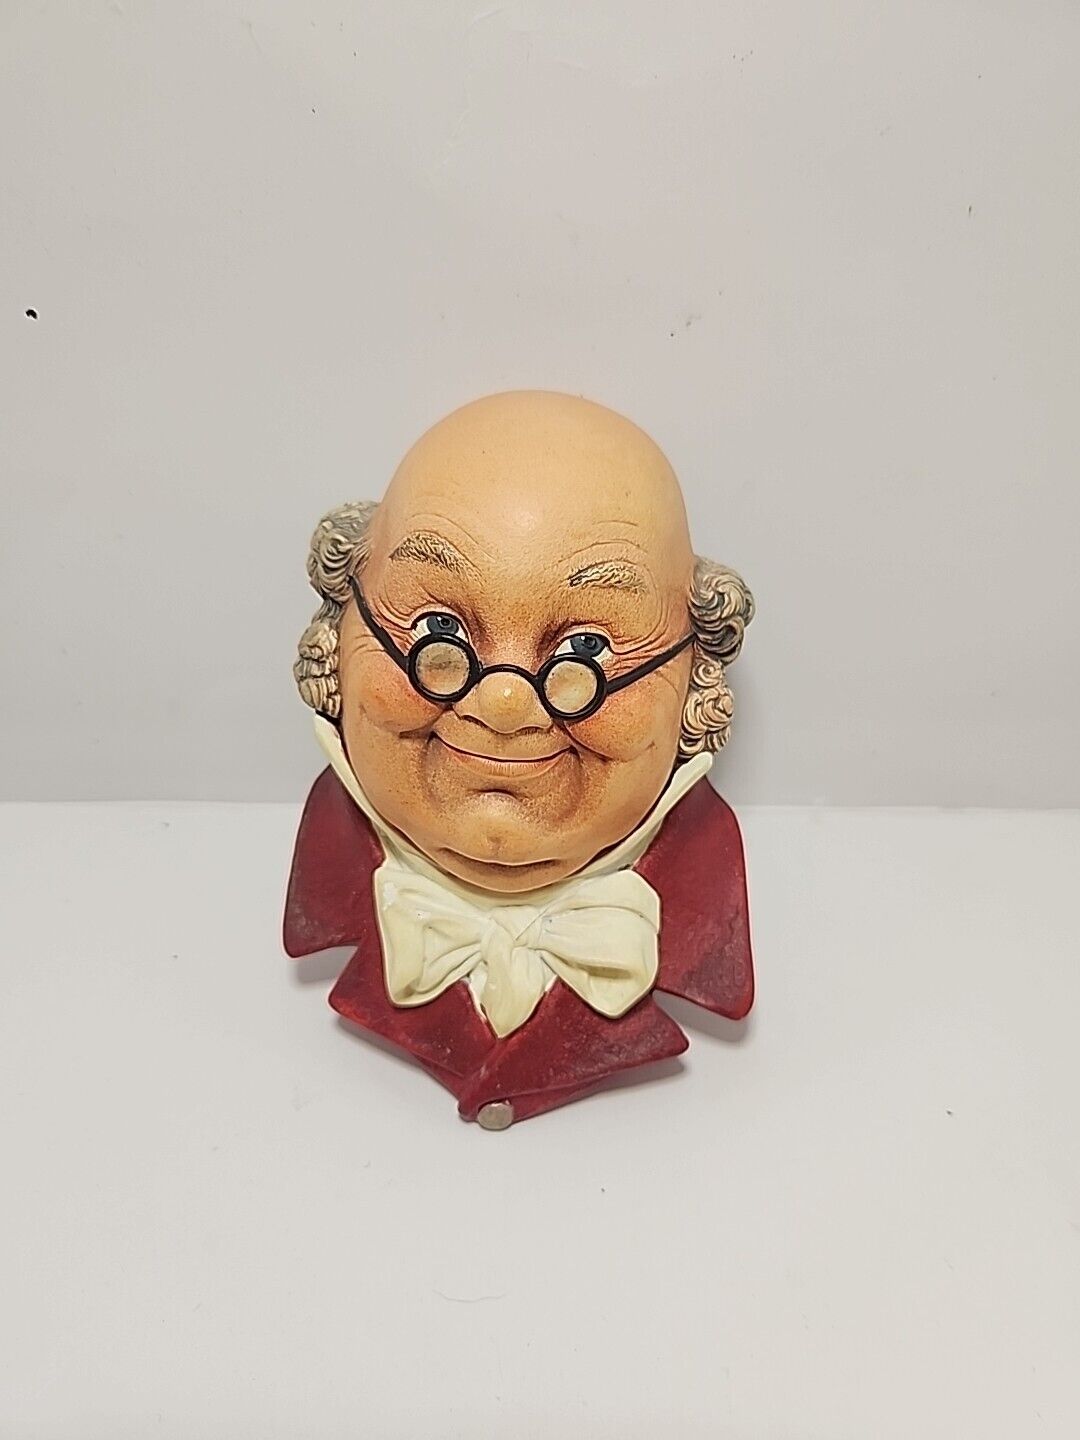 Bossons “Mr. Pickwick” Chalkware Head 1964 Charles Dickens’ Character England